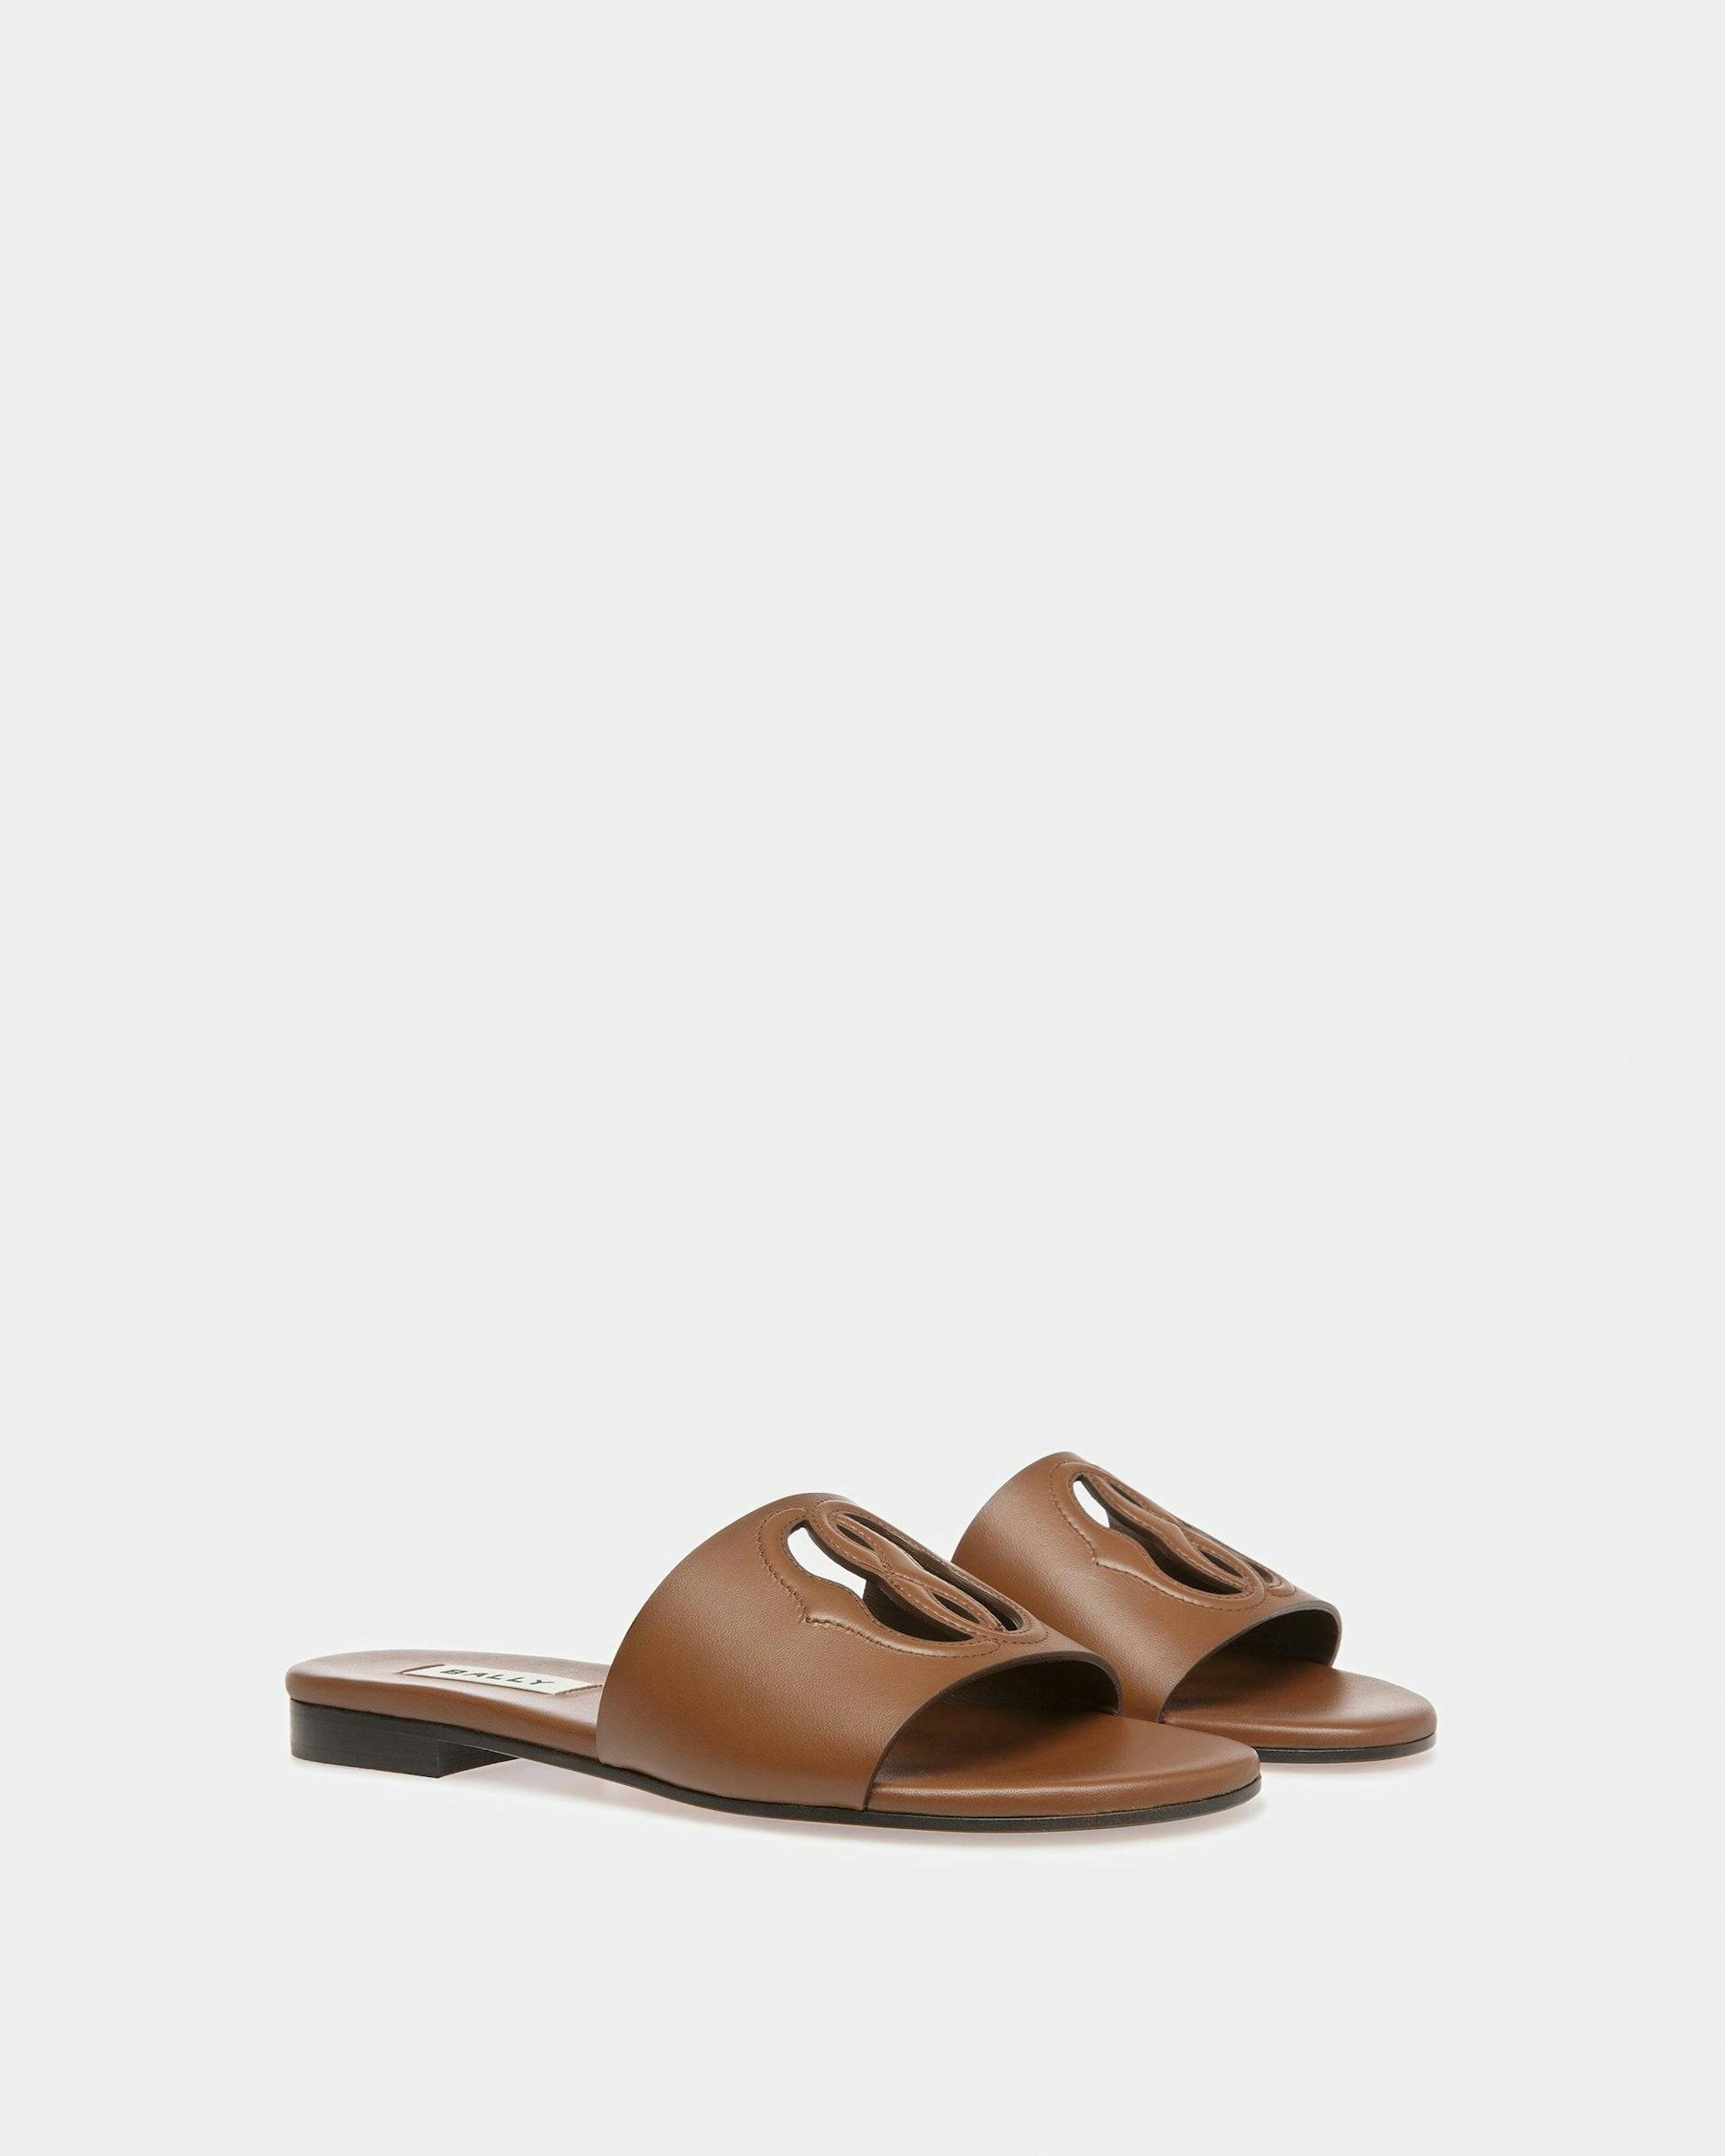 Emblem Slides In Brown Leather - Women's - Bally - 02